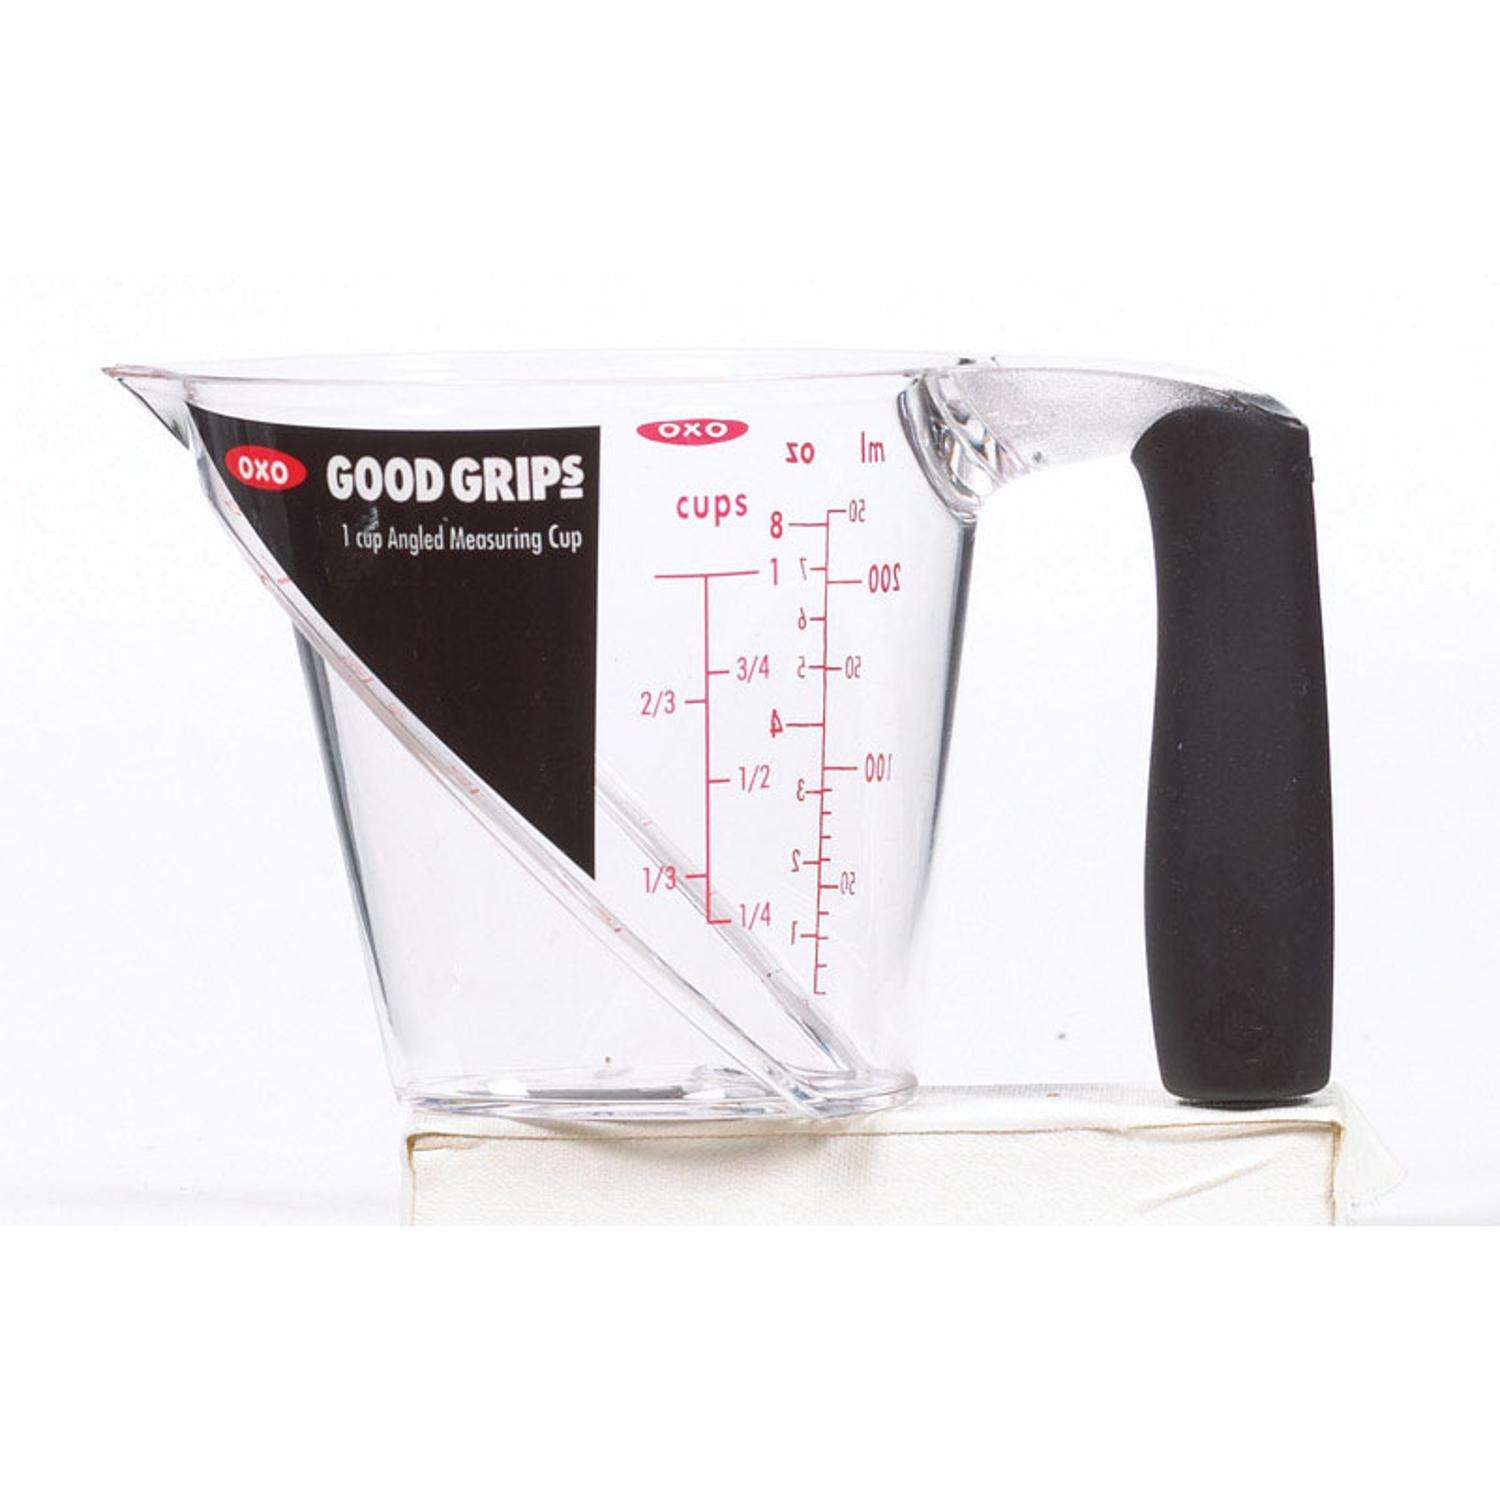 OXO Good Grips 1-Cup Angled Measuring Cup